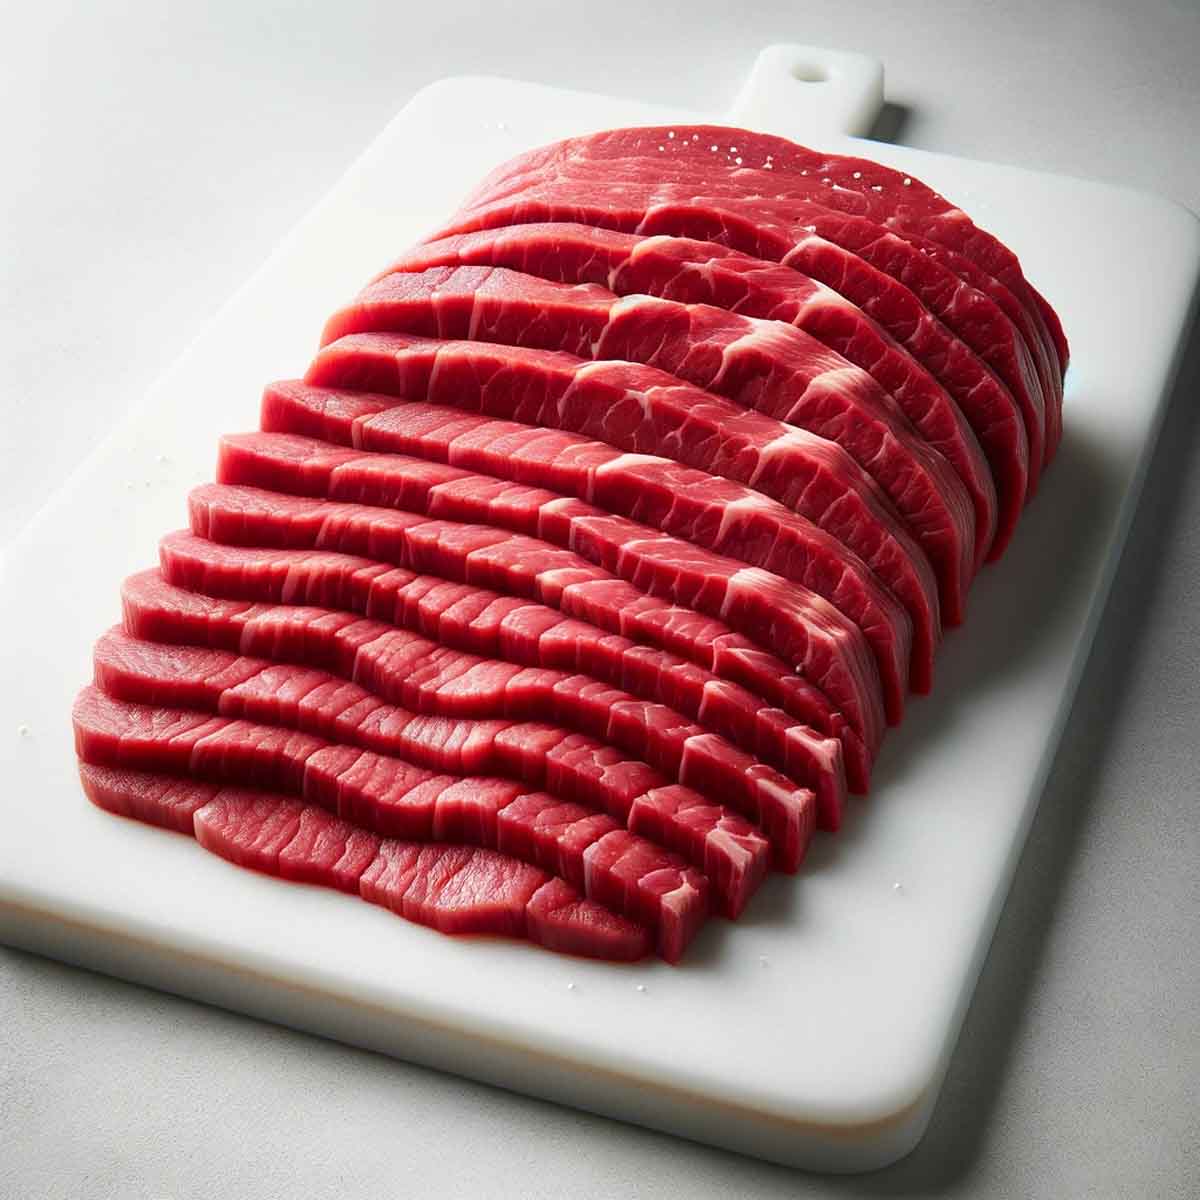 Thinly sliced raw beef arranged on a clean white cutting board, displaying uniform thickness and a fresh red color.